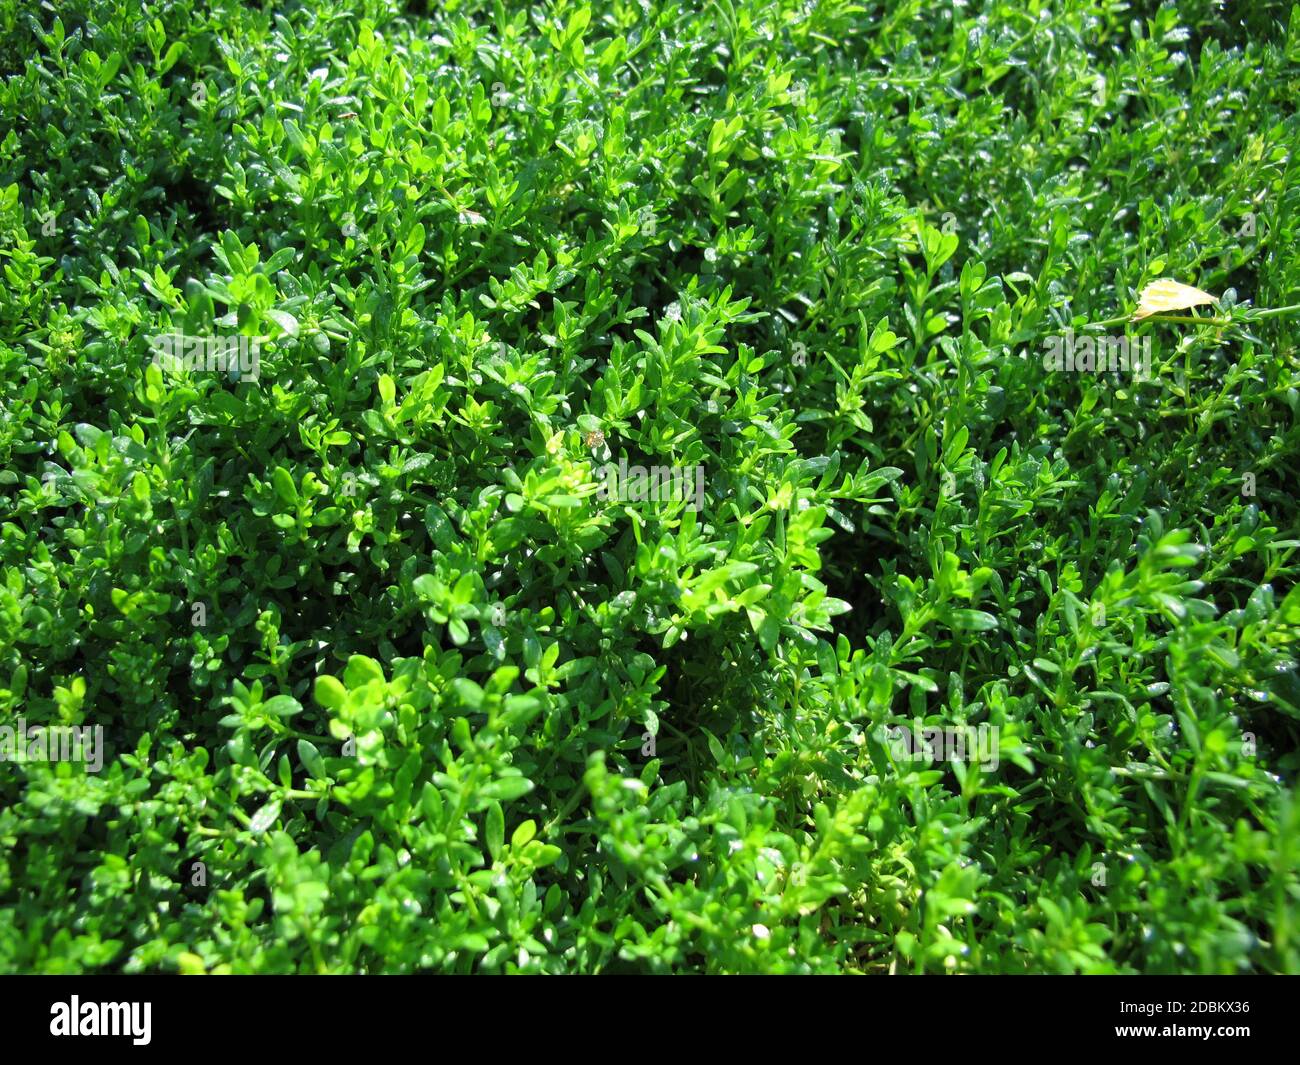 Smooth rupturewort, Herniaria glabra, a groundcover in the garden Stock Photo